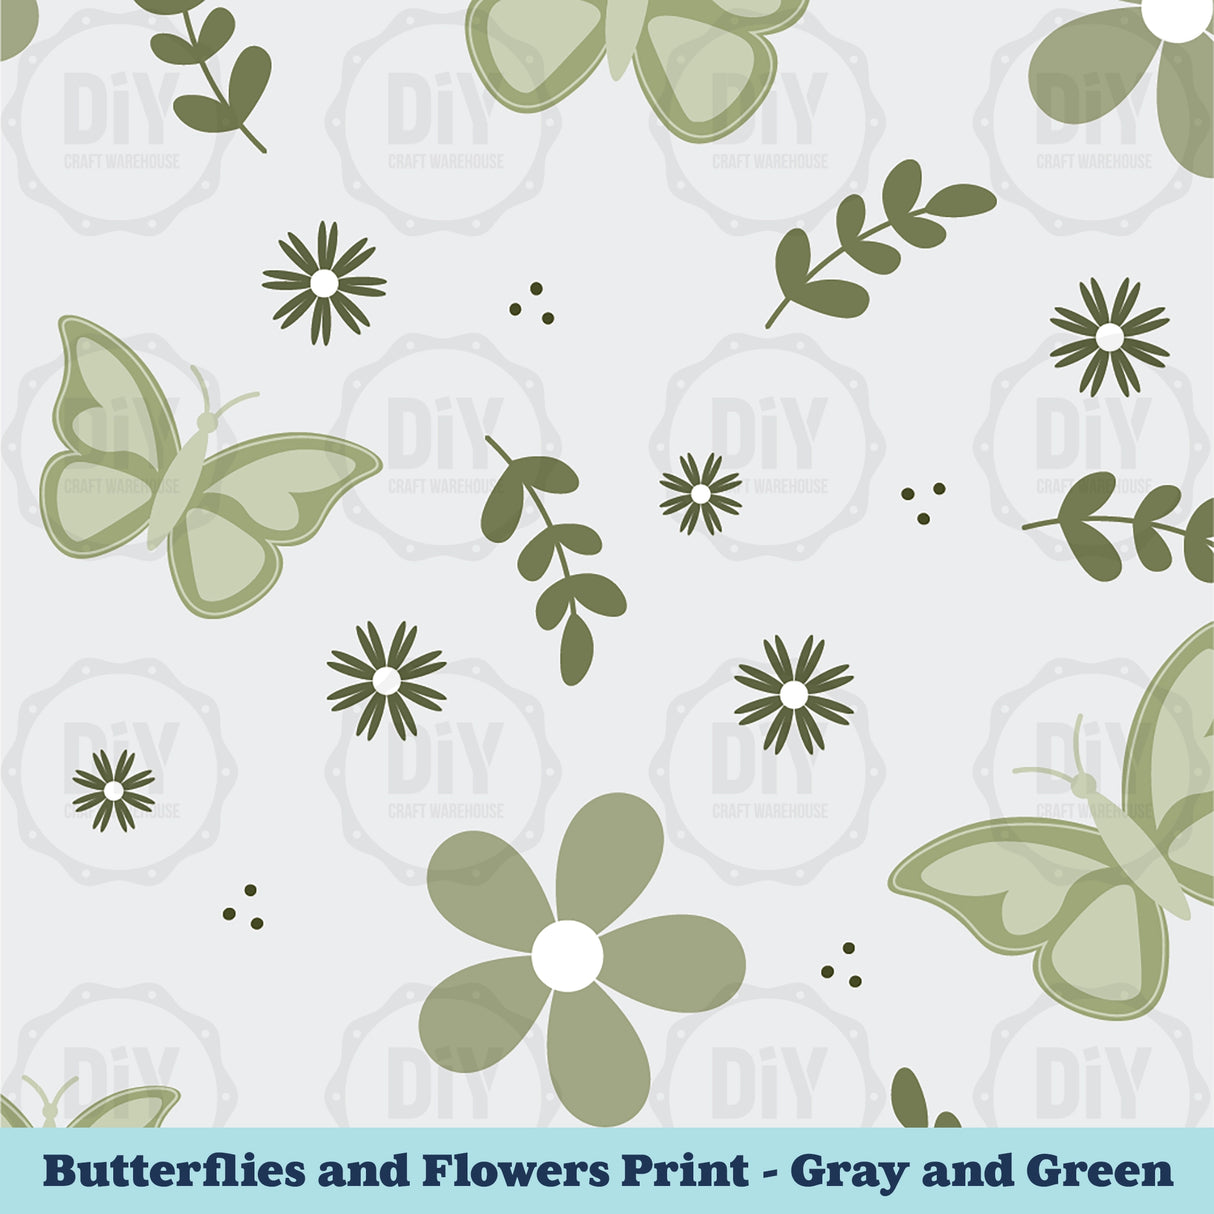 Butterflies and Flowers Sublimation Transfer - Gray & Green